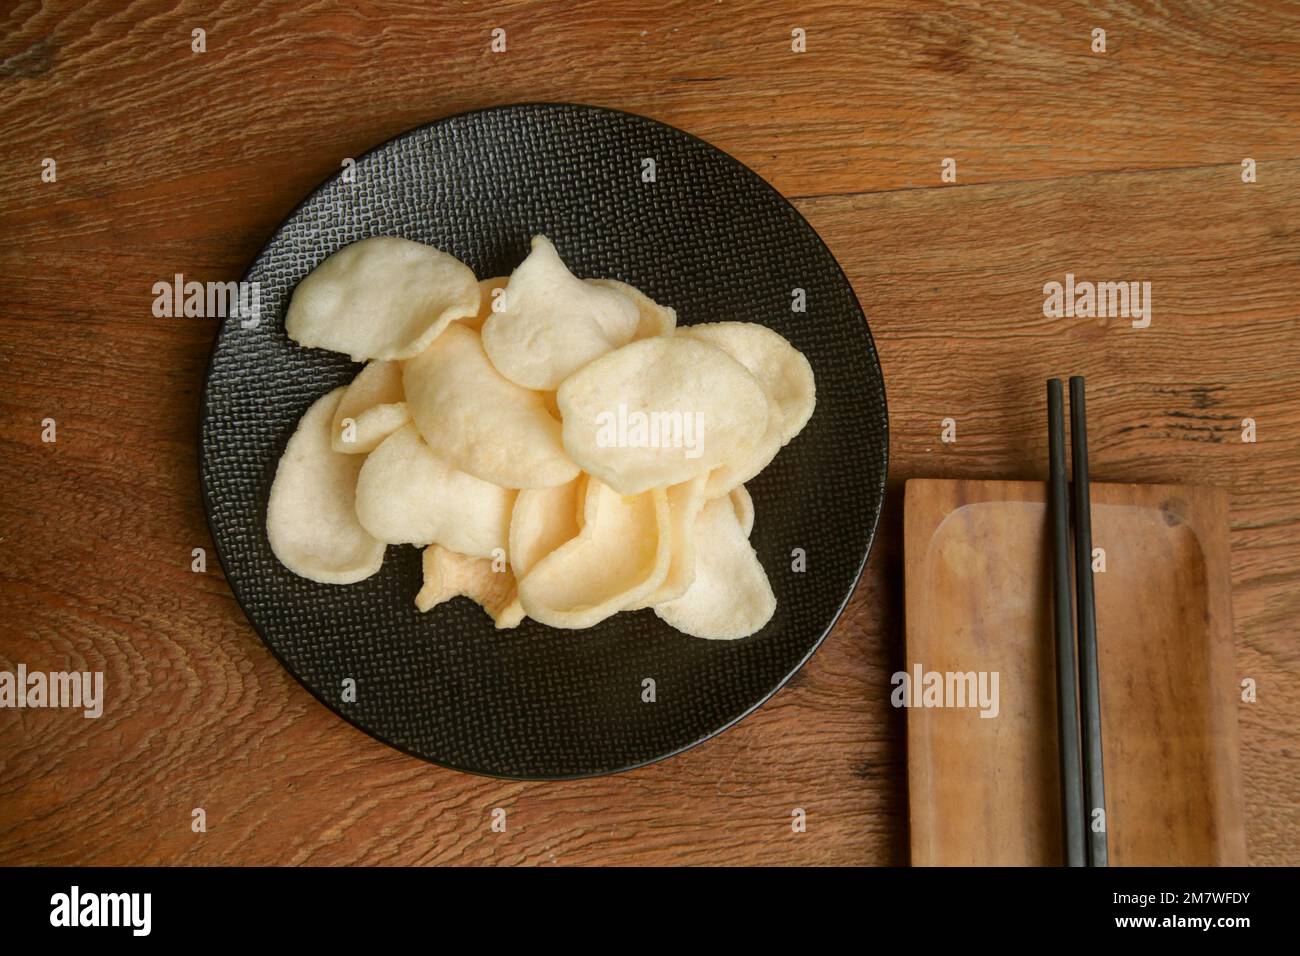 Prawn crackers - a deep fried snack made from starch and prawn, common snack in Southeast Asian cuisine Stock Photo